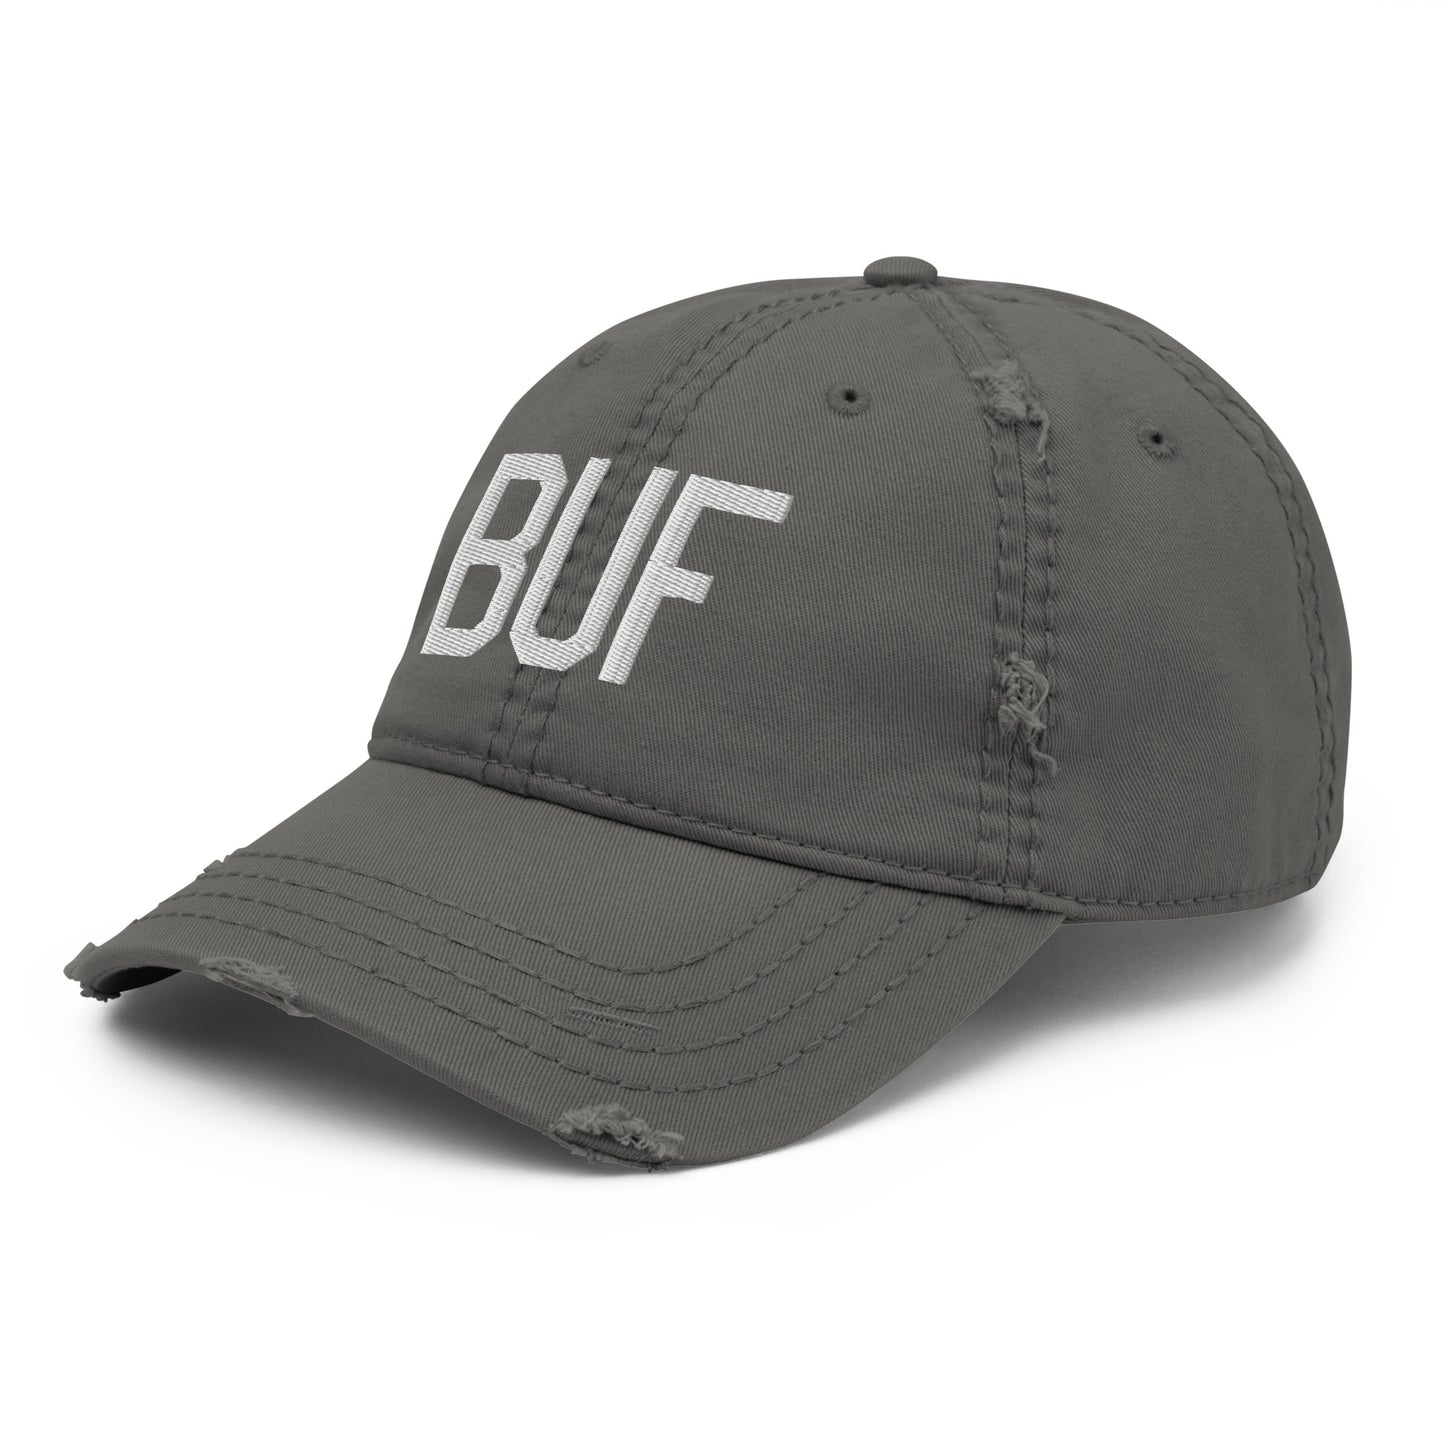 Airport Code Distressed Hat - White • BUF Buffalo • YHM Designs - Image 16